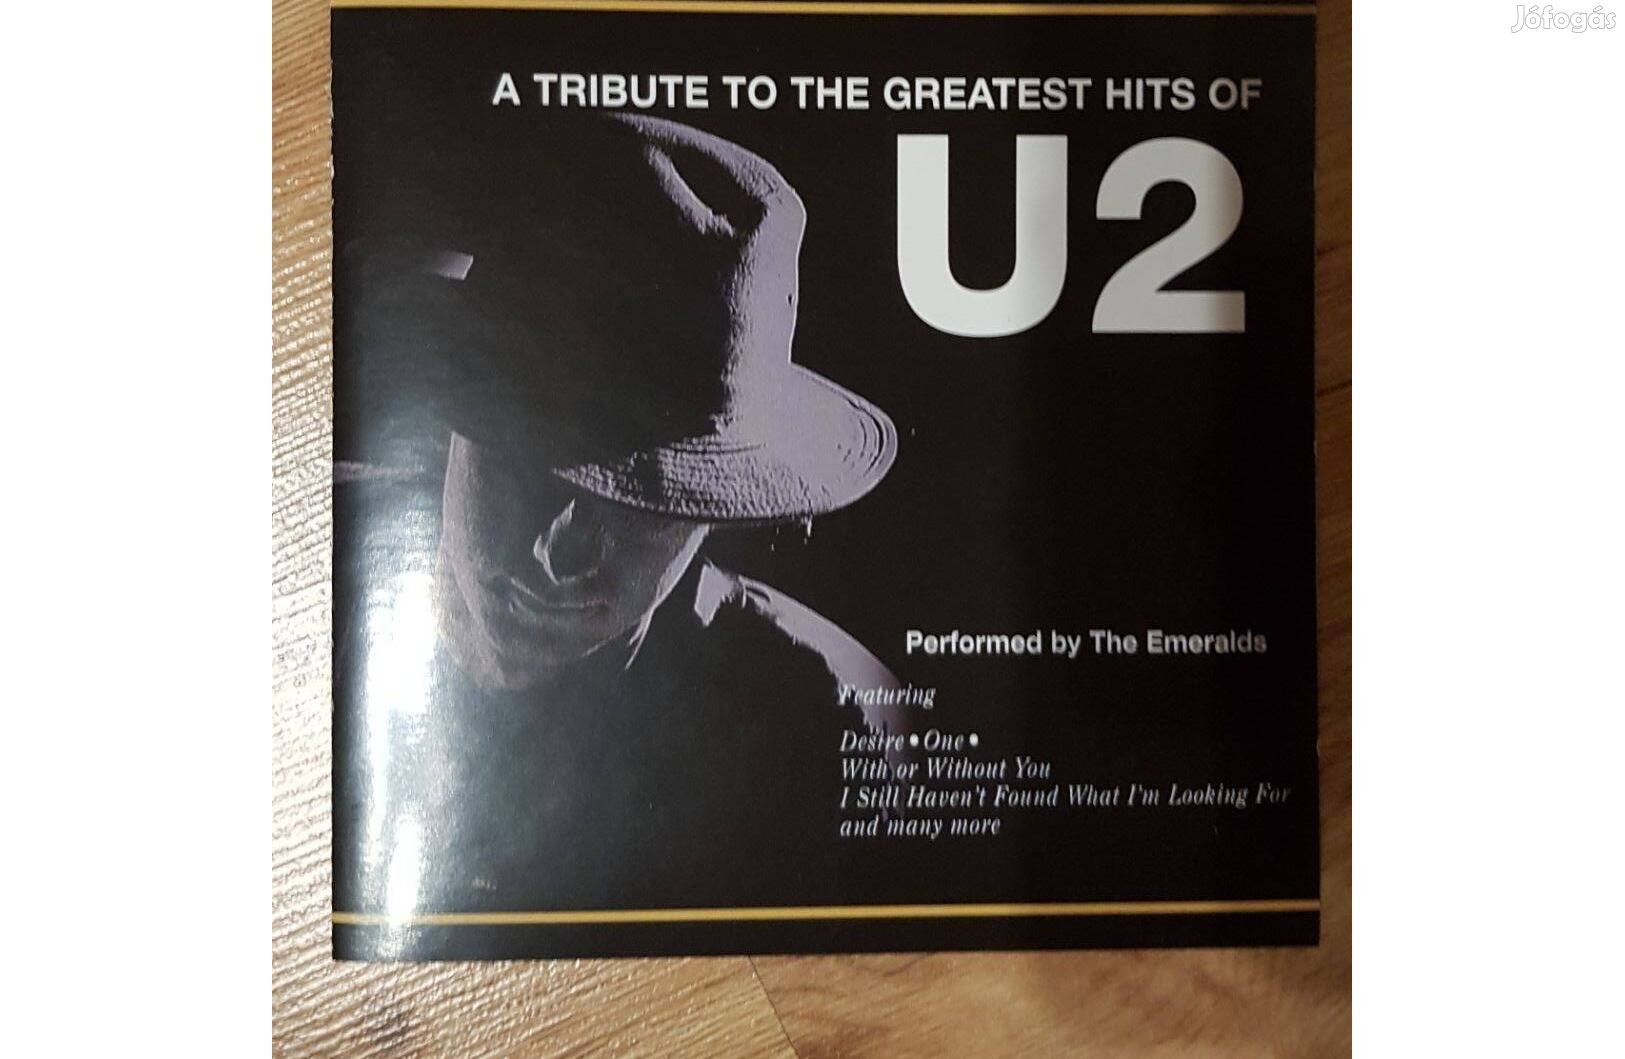 A Tribute To The Greatest Hits Of U2 - Performed By The Emeralds CD